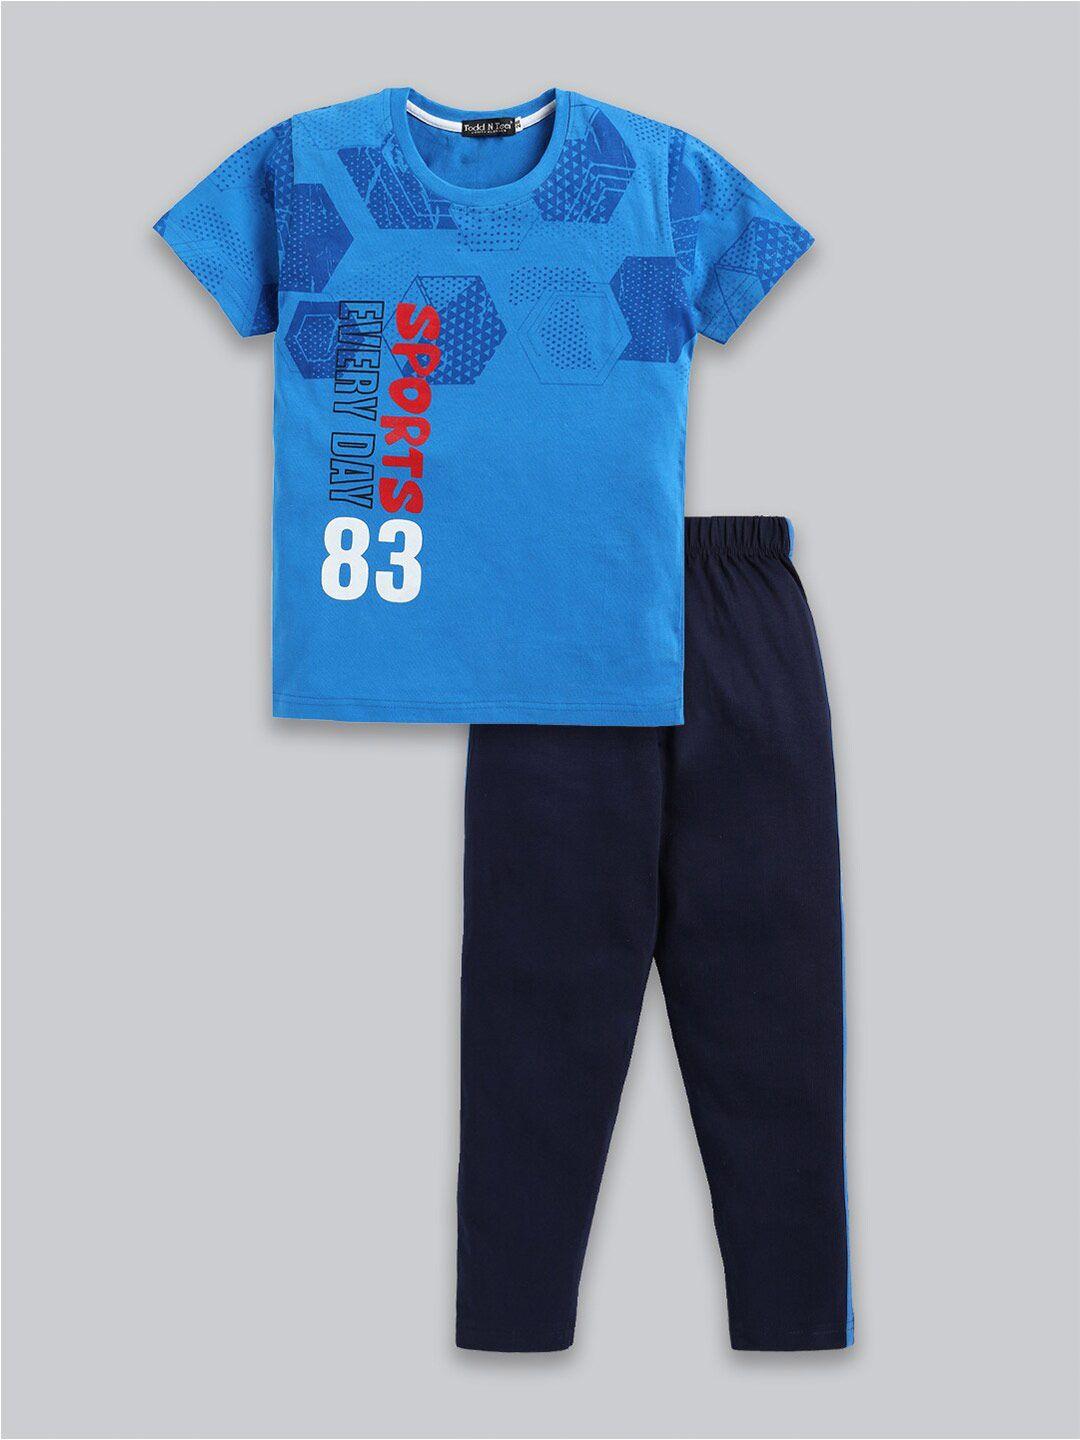 Todd N Teen Boys Printed Pure Cotton Round Neck T-shirt with Trousers Clothing Set